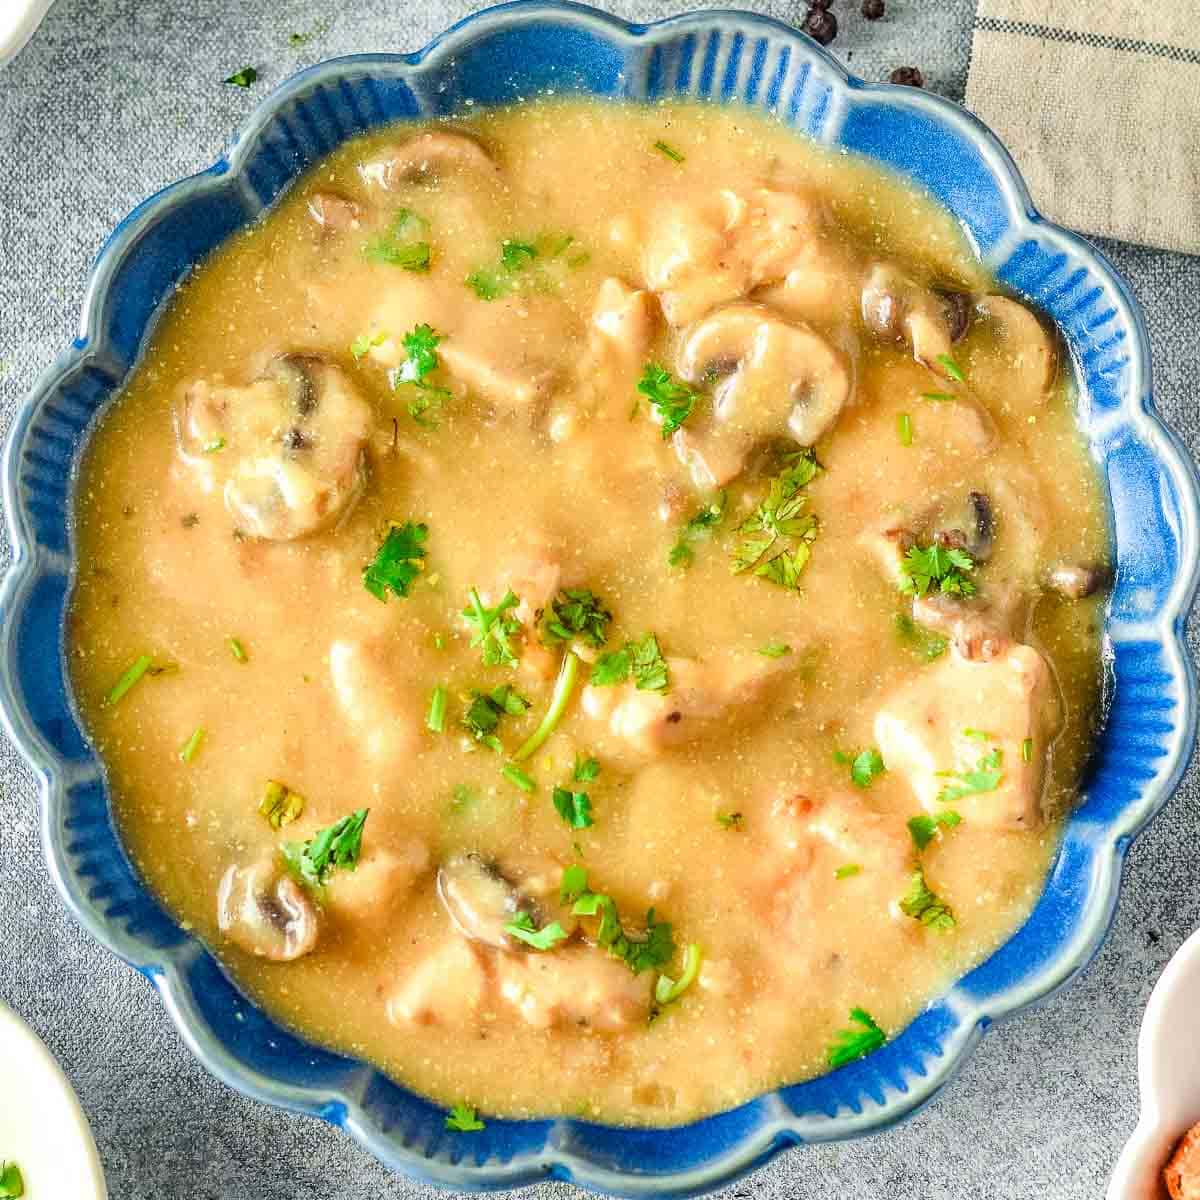 A bowl of chicken stroganoff with bread and parsley.